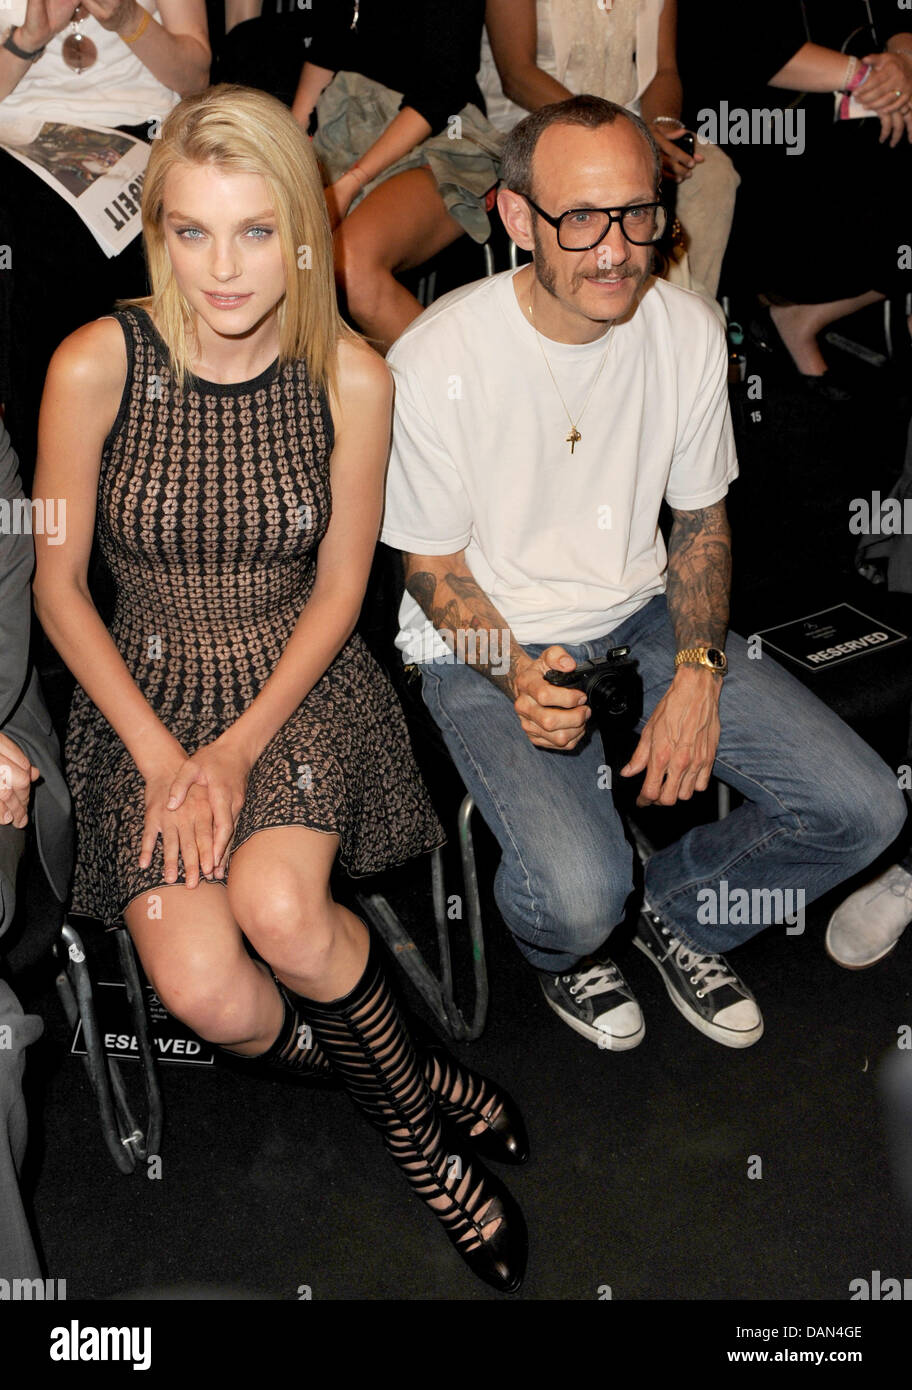 Canadian model Jessica Stam and US photographer Terry Richardson attend the  Rena Lange fashion show during the Mercedes-Benz Fashion Week in Berlin,  Germany, 7 July 2011. The presentation of the Spring/Summer 2012